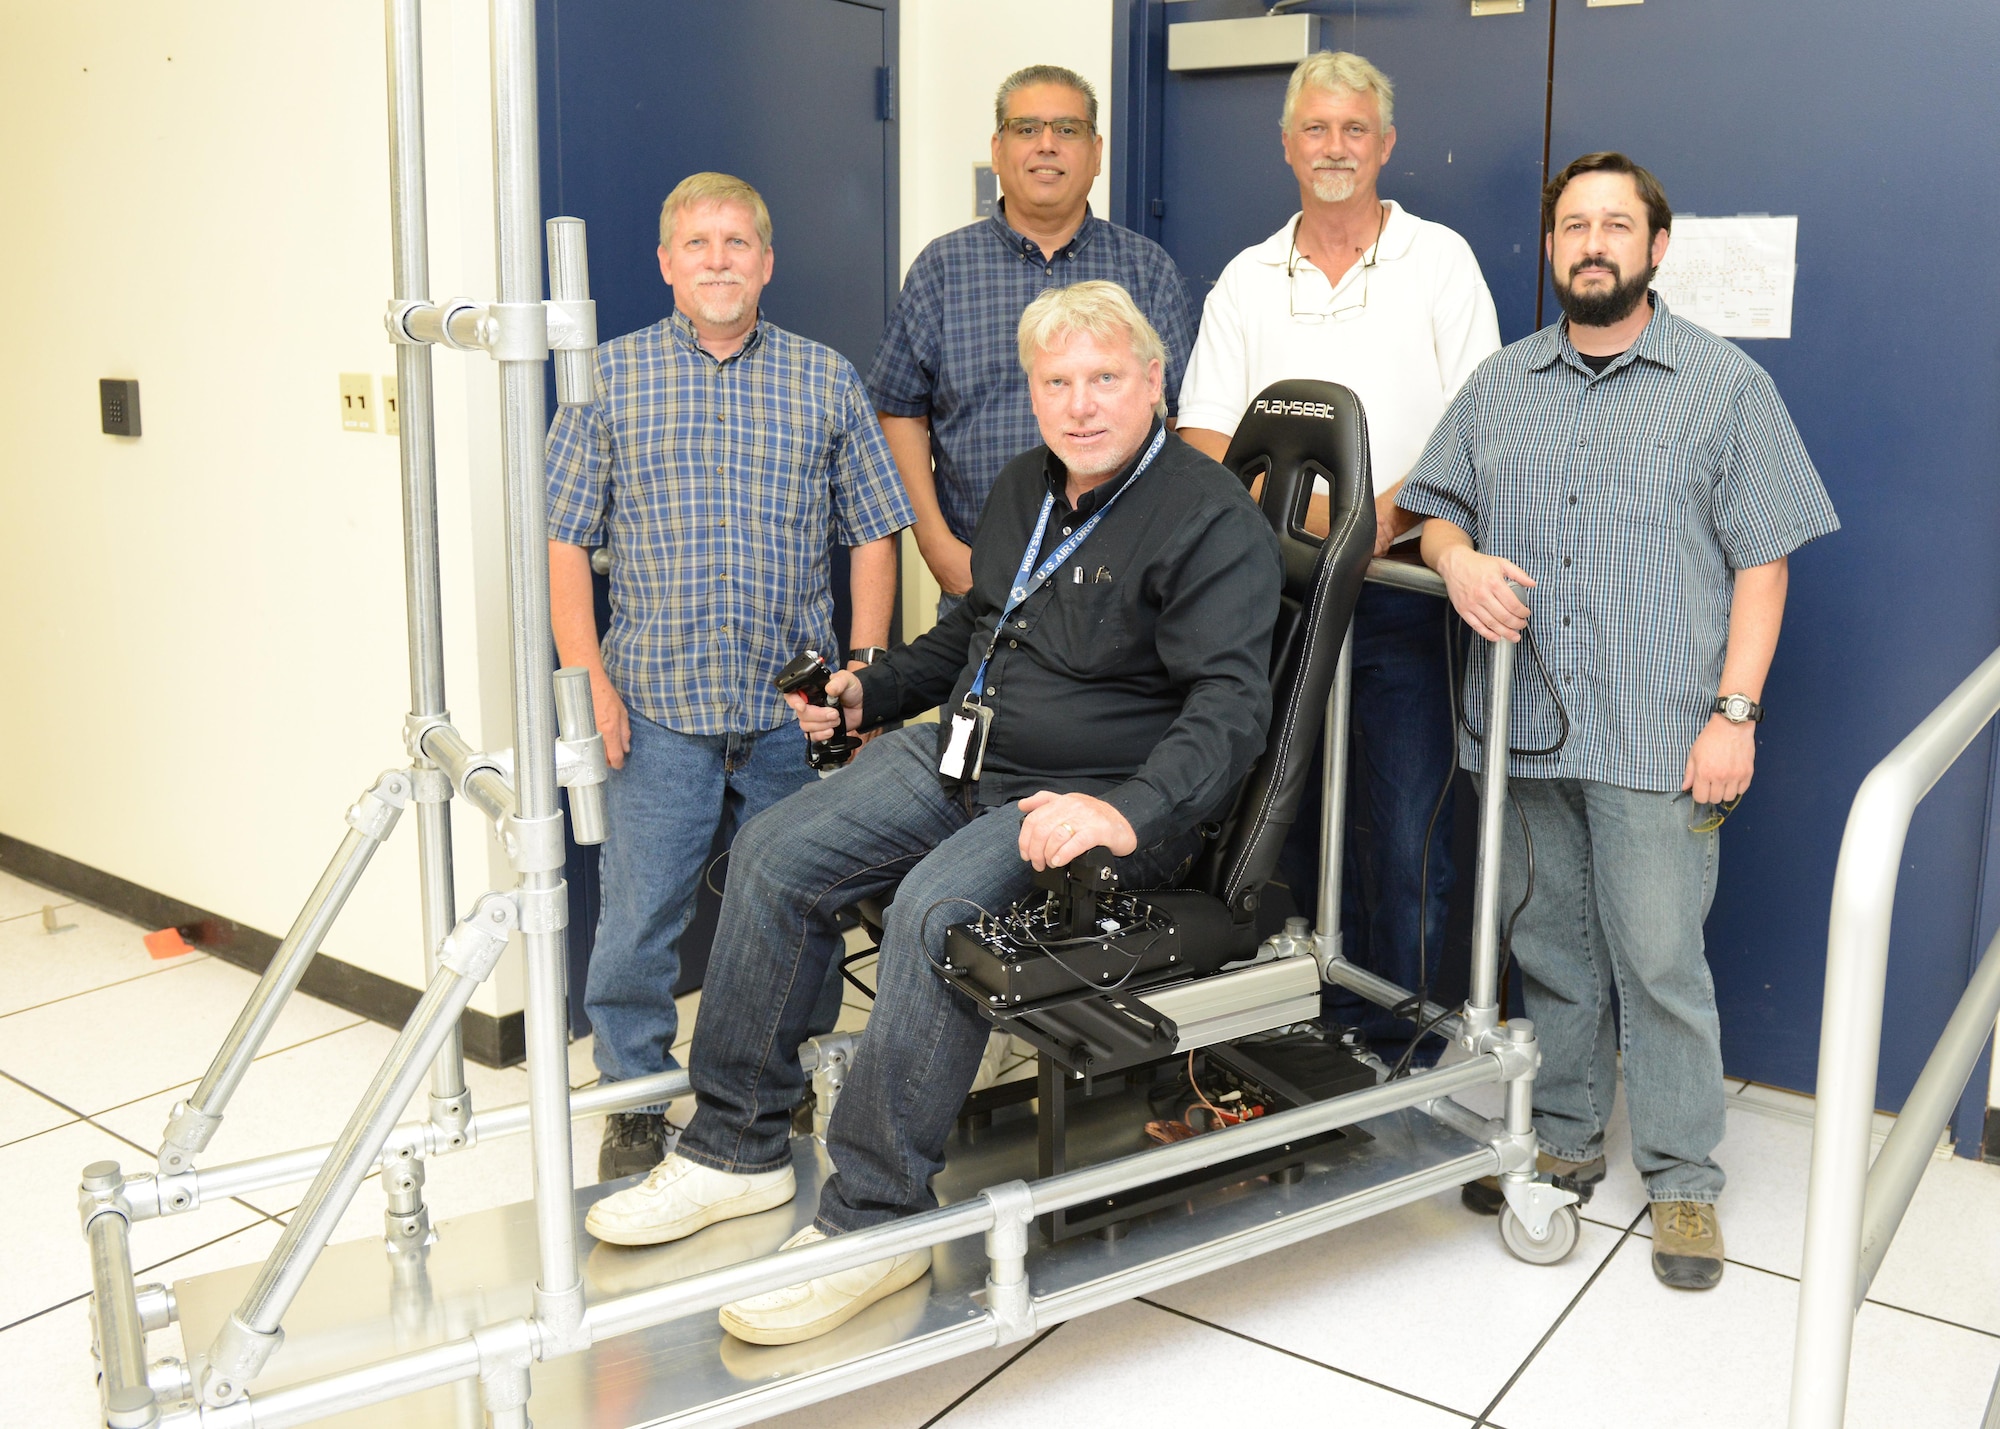 The Portable Manned Interactive Cockpit being built by members of the 772nd Test Squadron should be completed and ready for use by July 2016. The innovation team members are, from rear left to right, Curtis Westfall, Victor Cruz, Gary Johnson, Kevin Dolber and Orion Westfall, seated. (U.S. Air Force photo/Kenji Thuloweit)